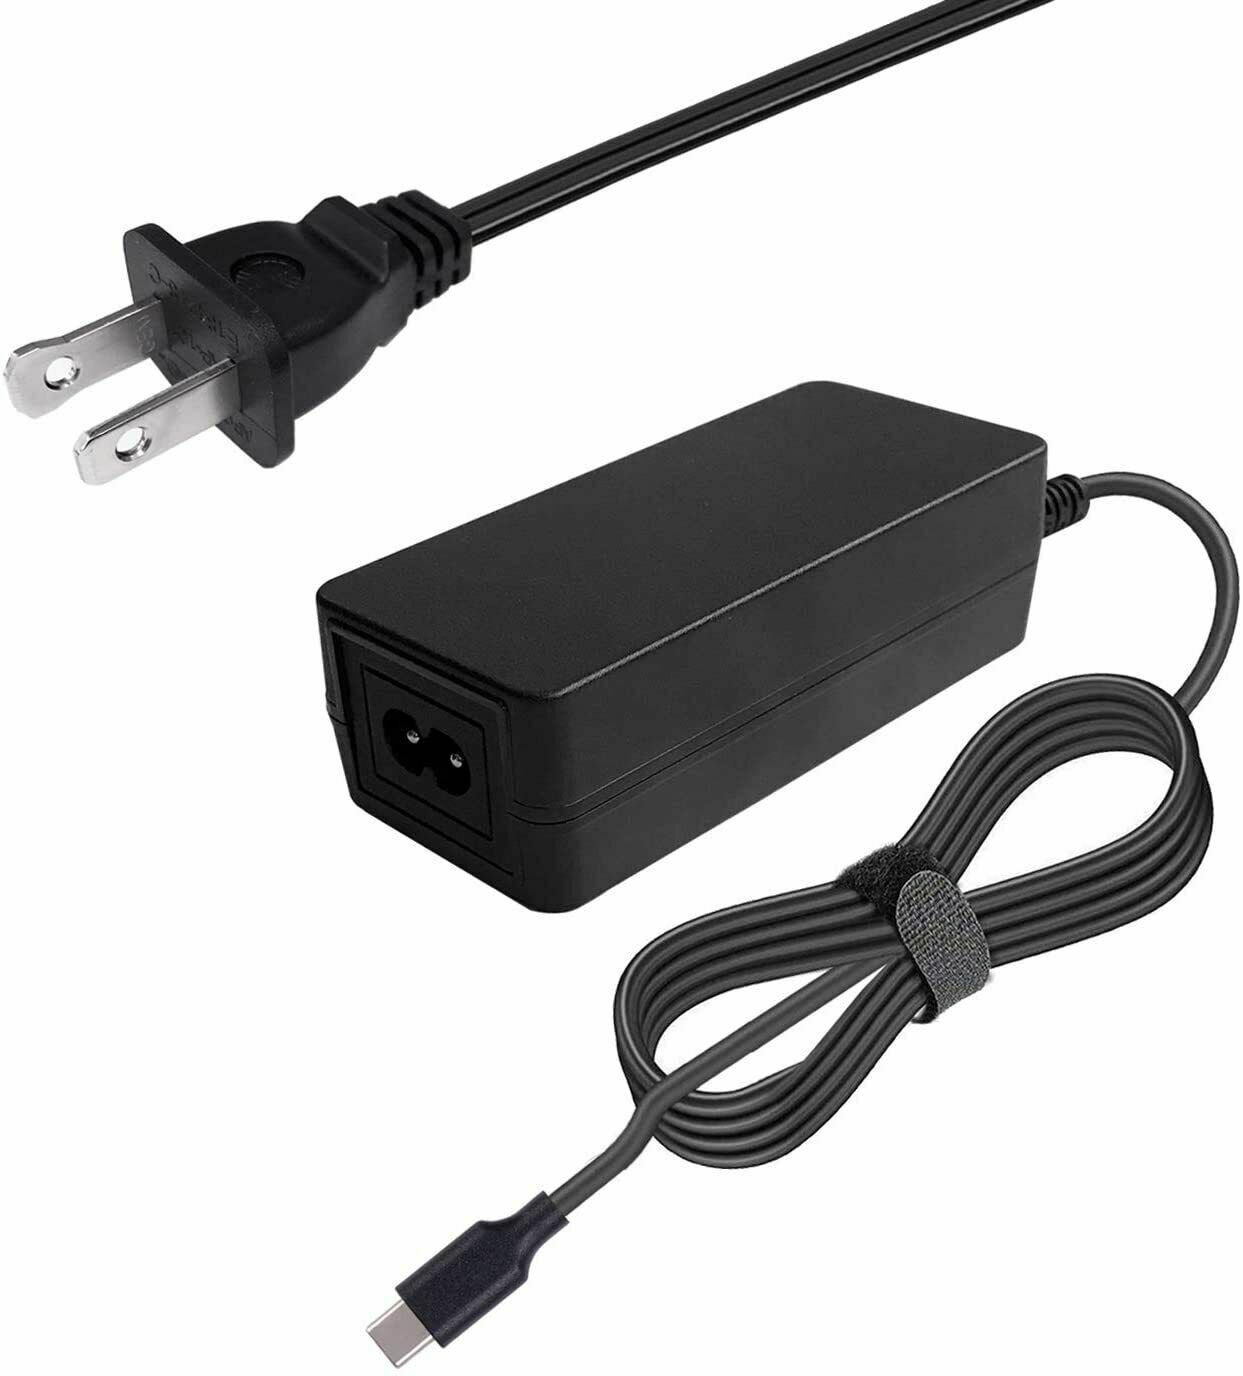 Charger For Lenovo IdeaPad 5 15ABA7 82SG 82SG0004US USB-C AC Adapter Power Cord